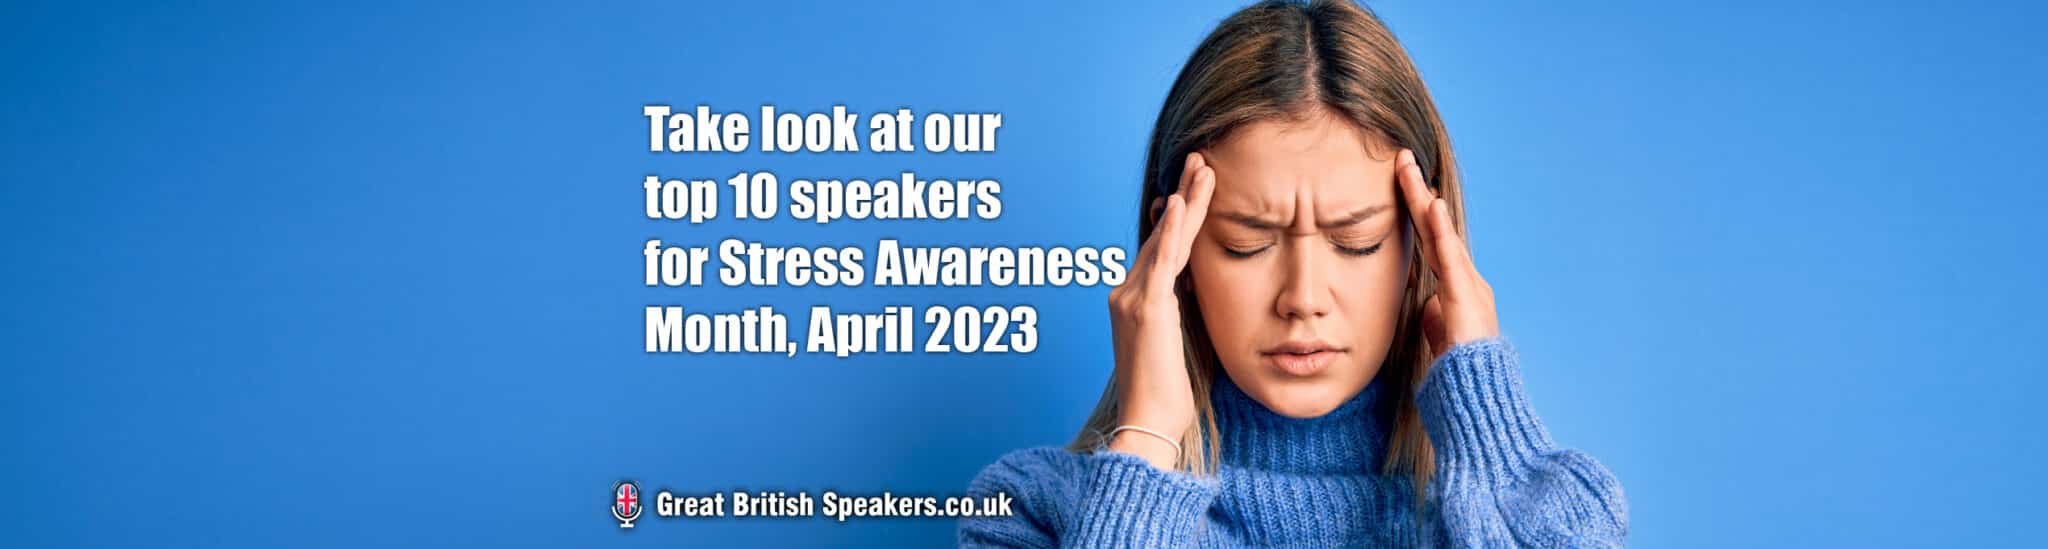 Top 10 speakers for Stress Awareness Month at Great British Speakers